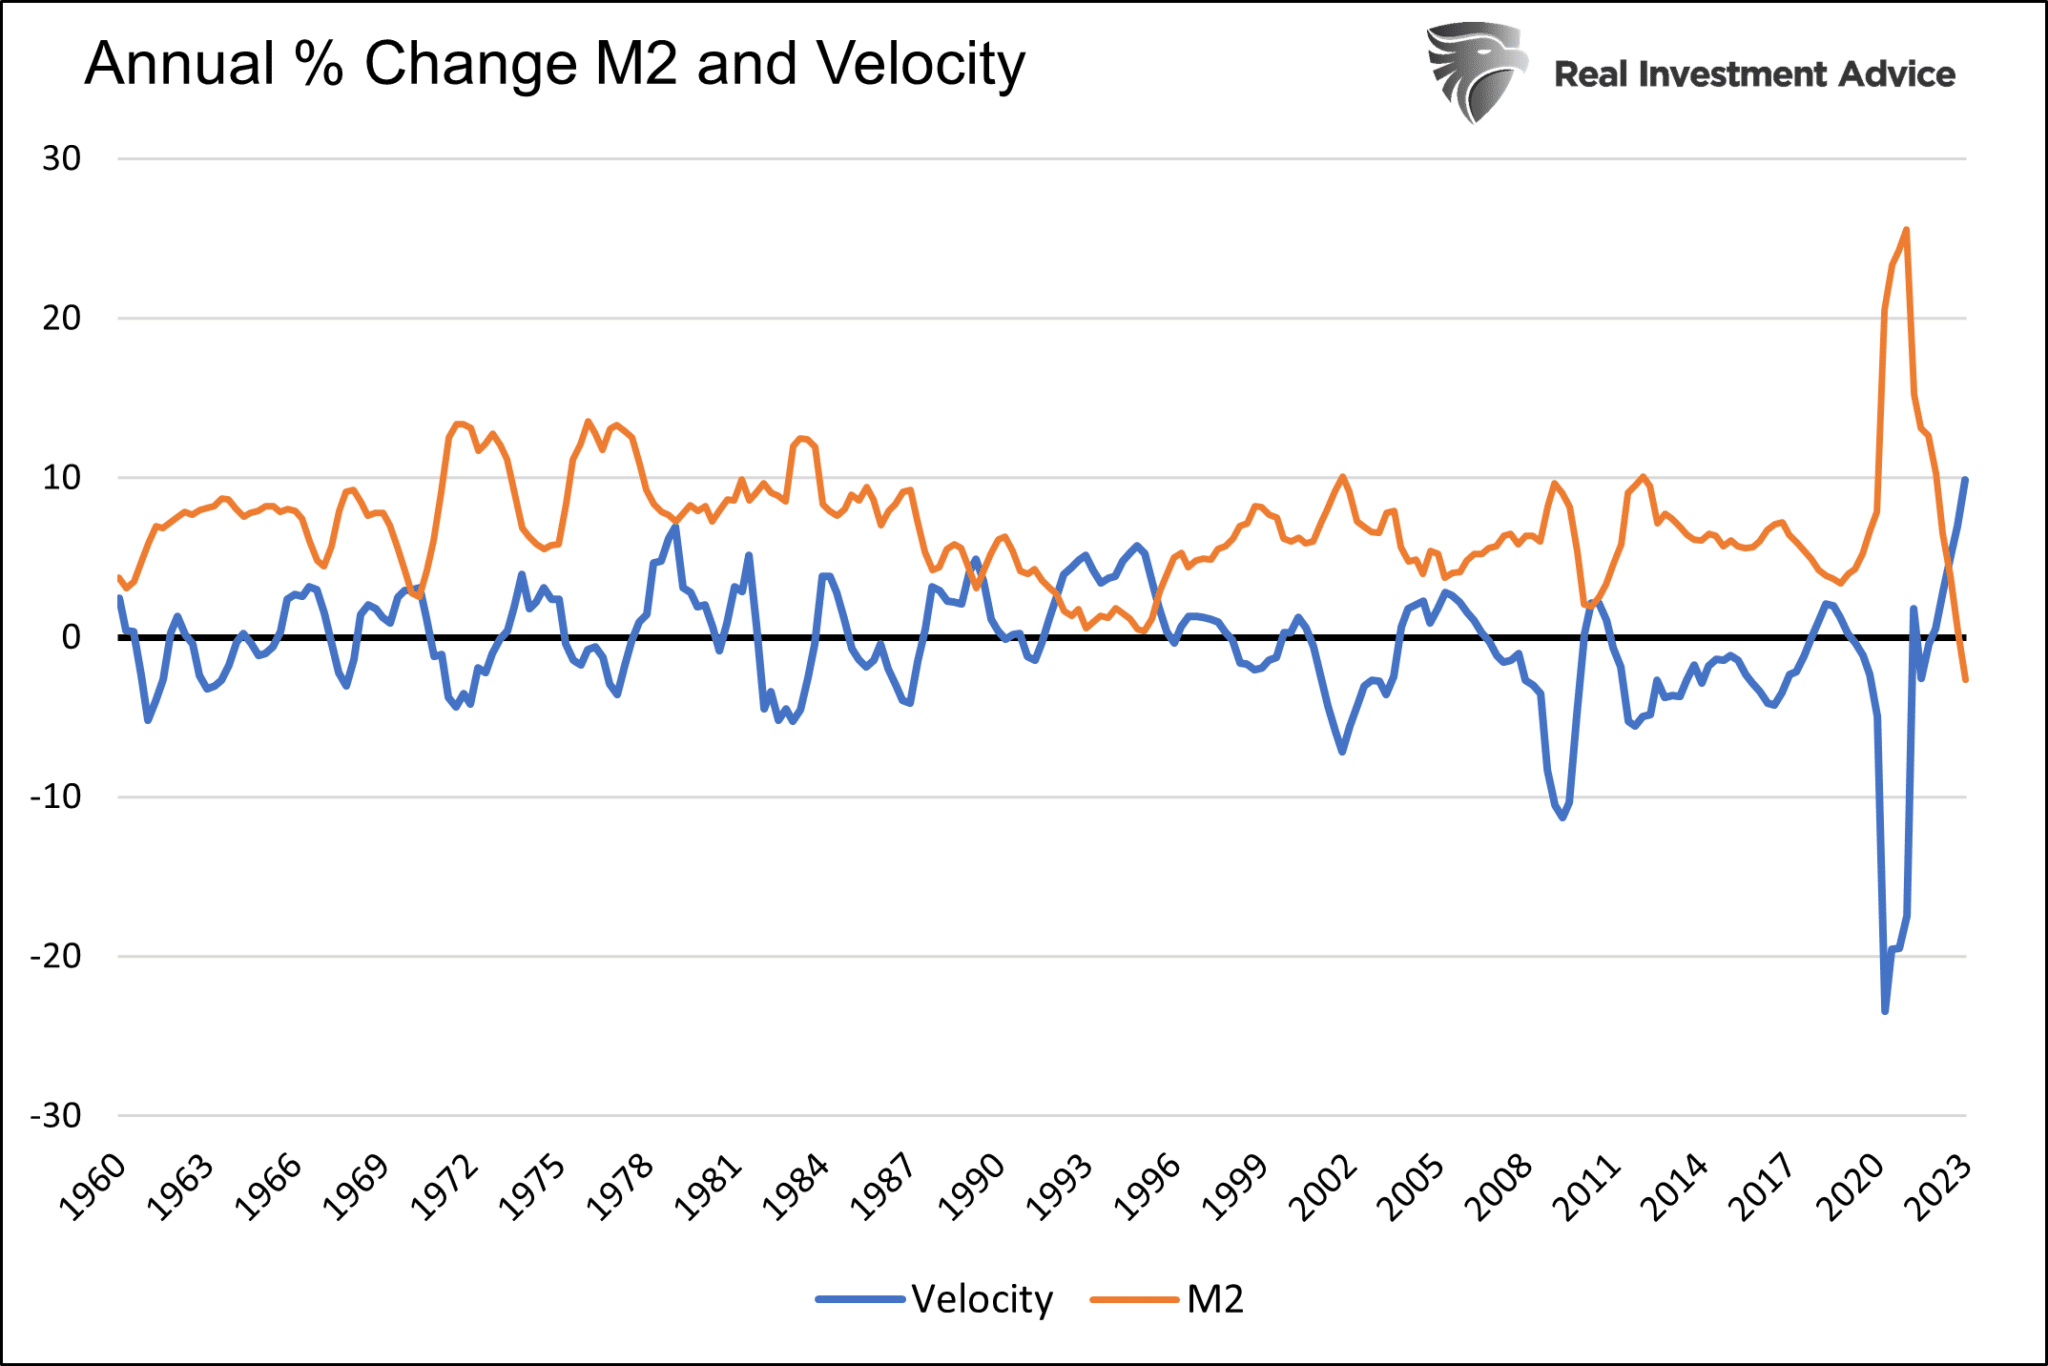 Change in M2 and Velocity